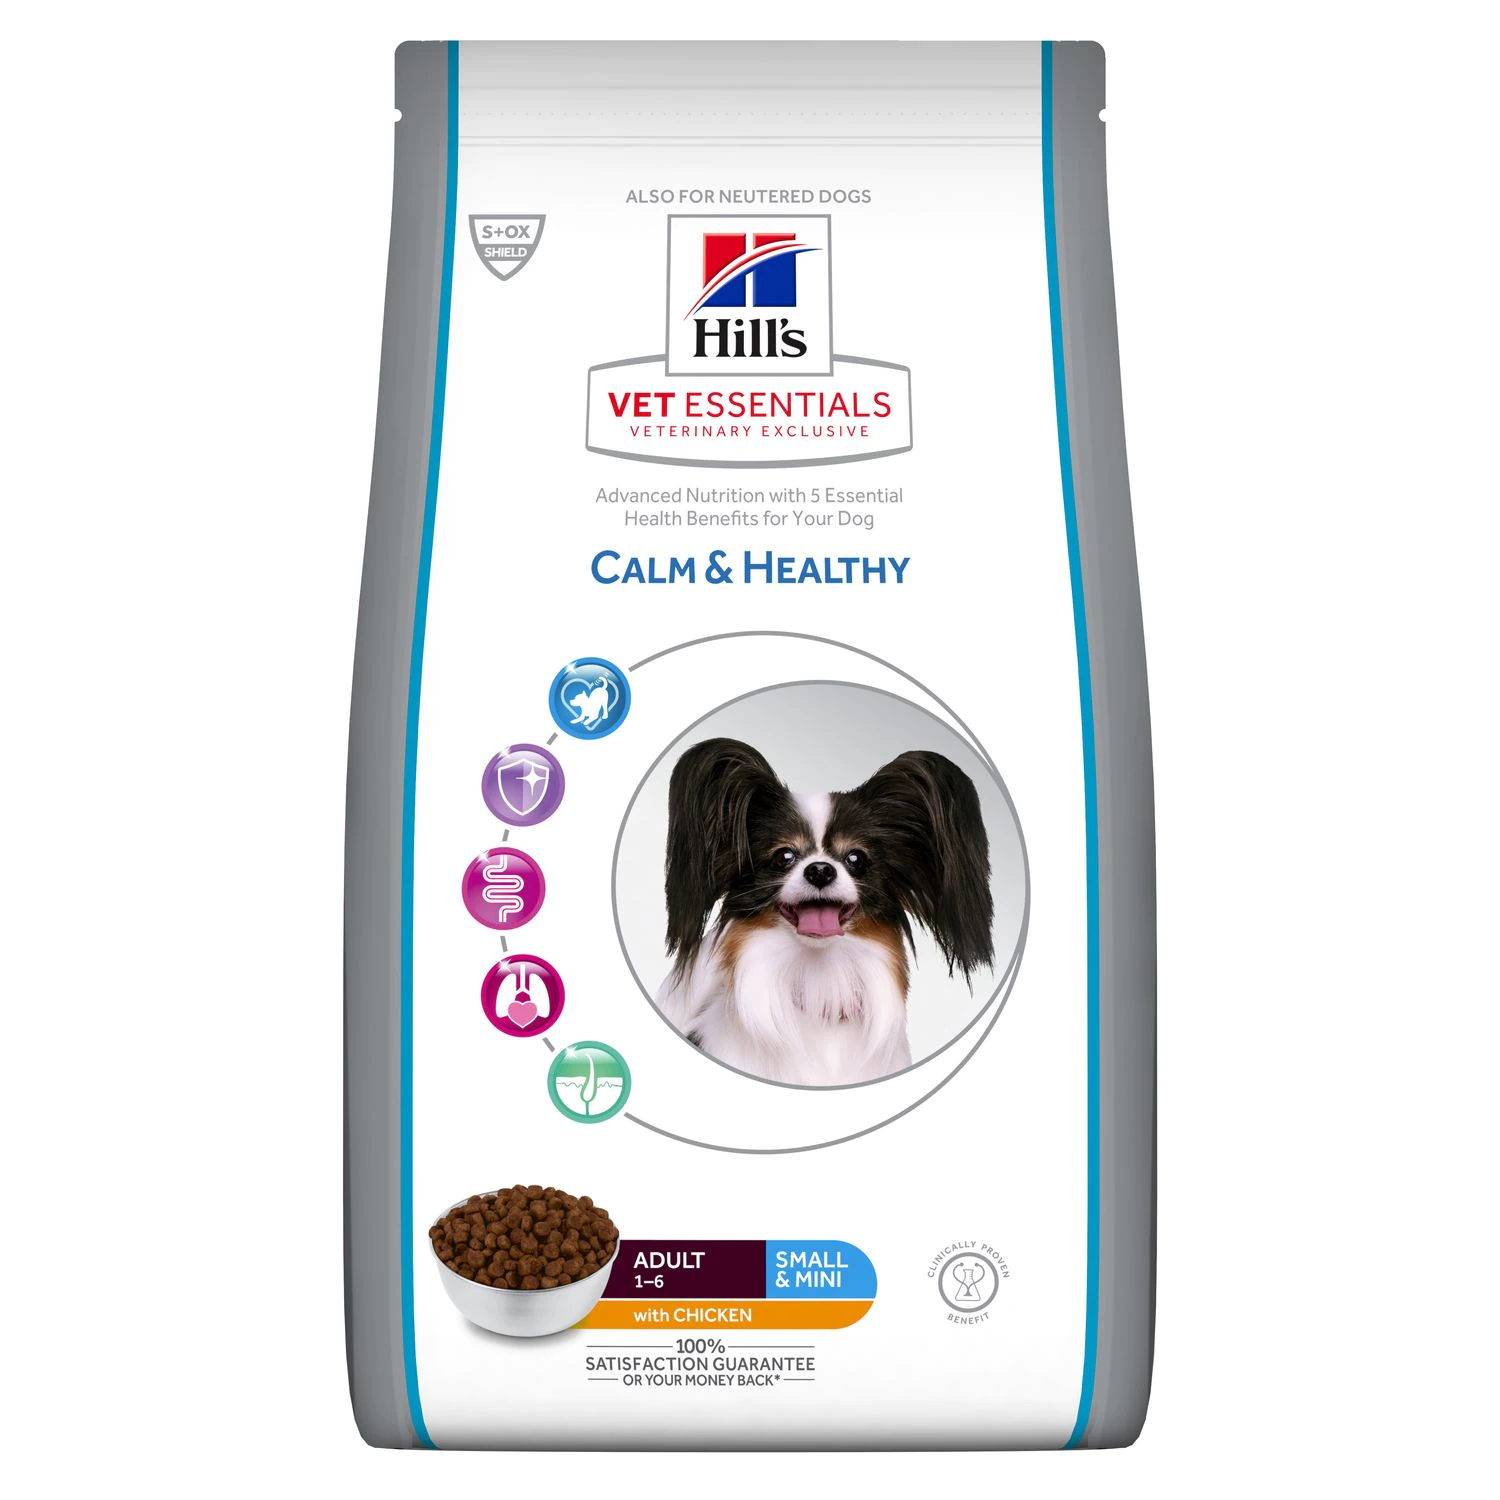 OUTLET - Hill's Vet Essentials Calm & Healthy Adult Small & Mini Hond - 7kg